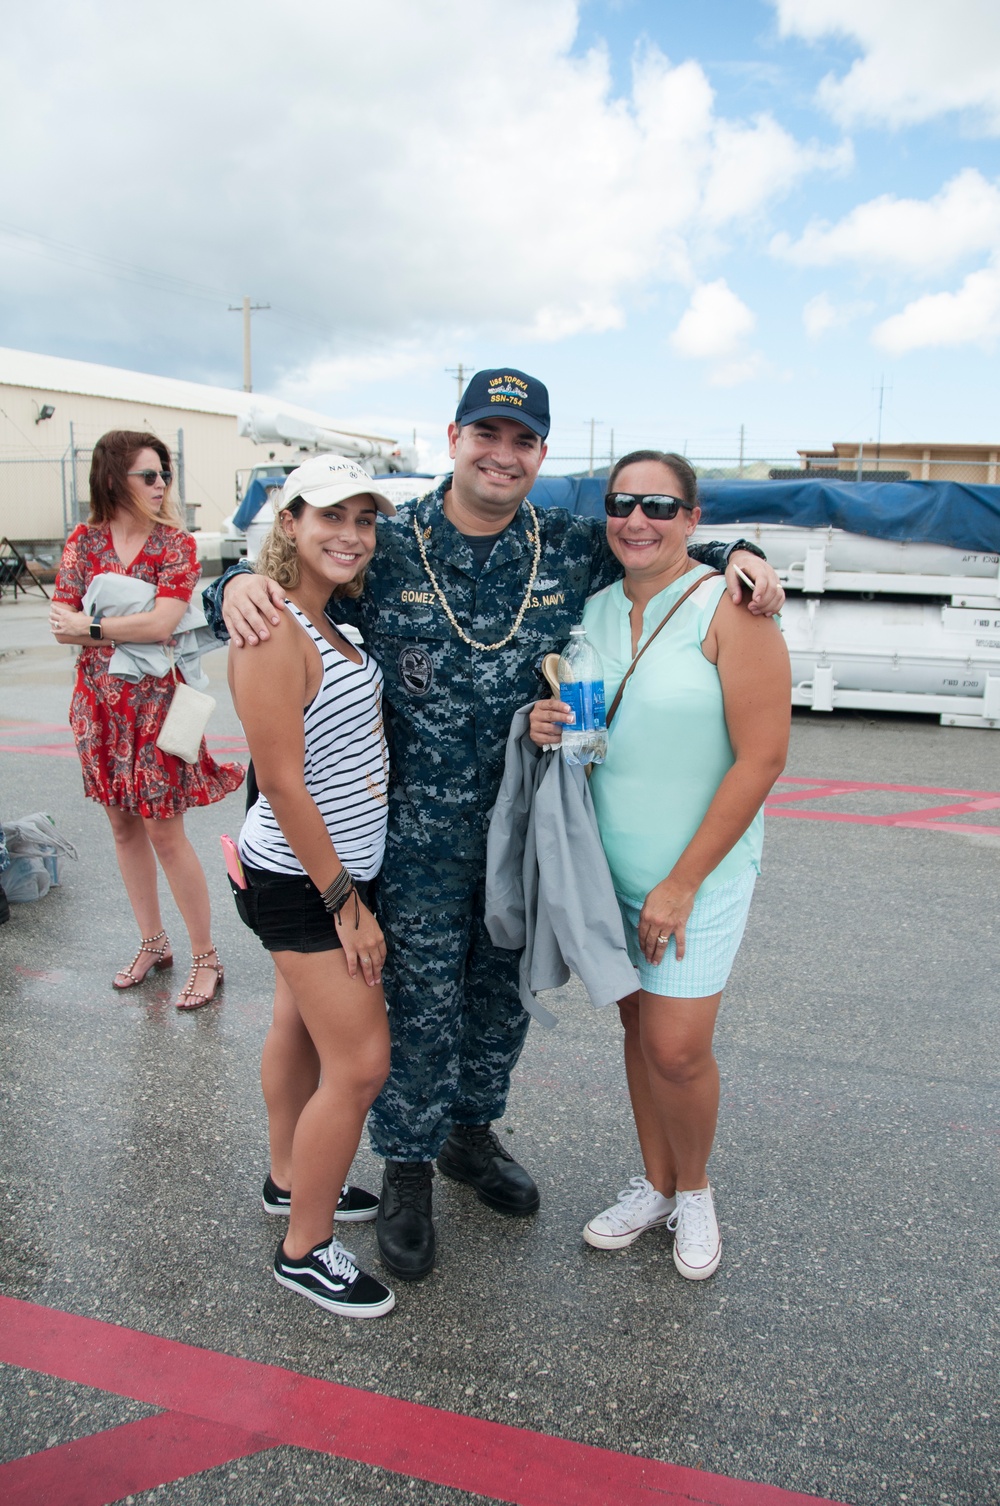 USS Topeka Sailor poses with family after returning home